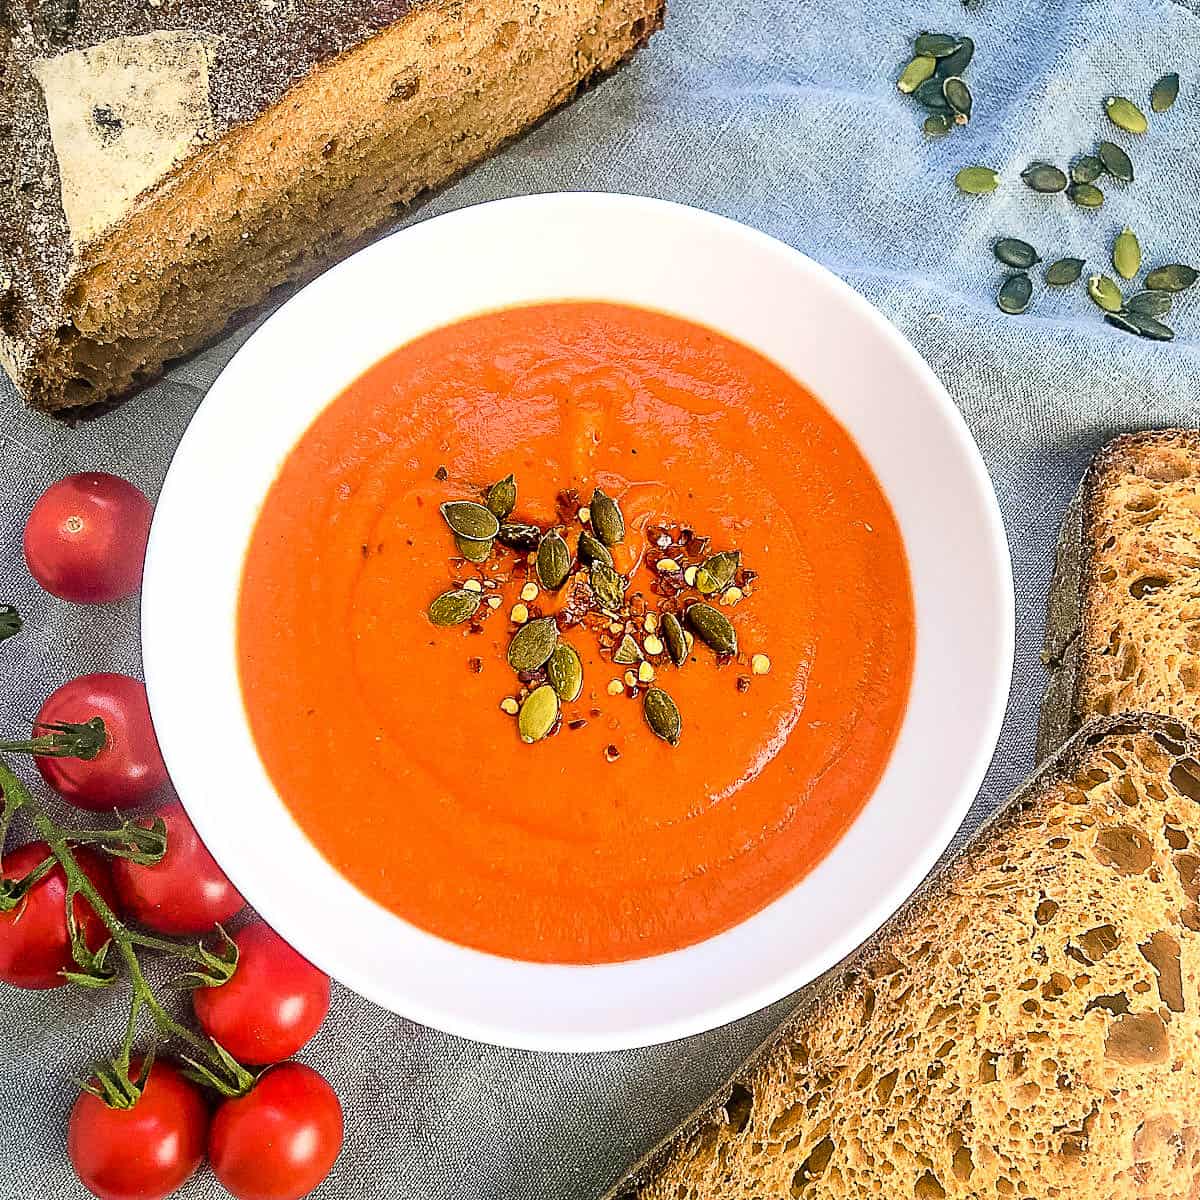 bowl of roasted red pepper and lentil soup garnished with pumpkin seeds and chilli flakes.